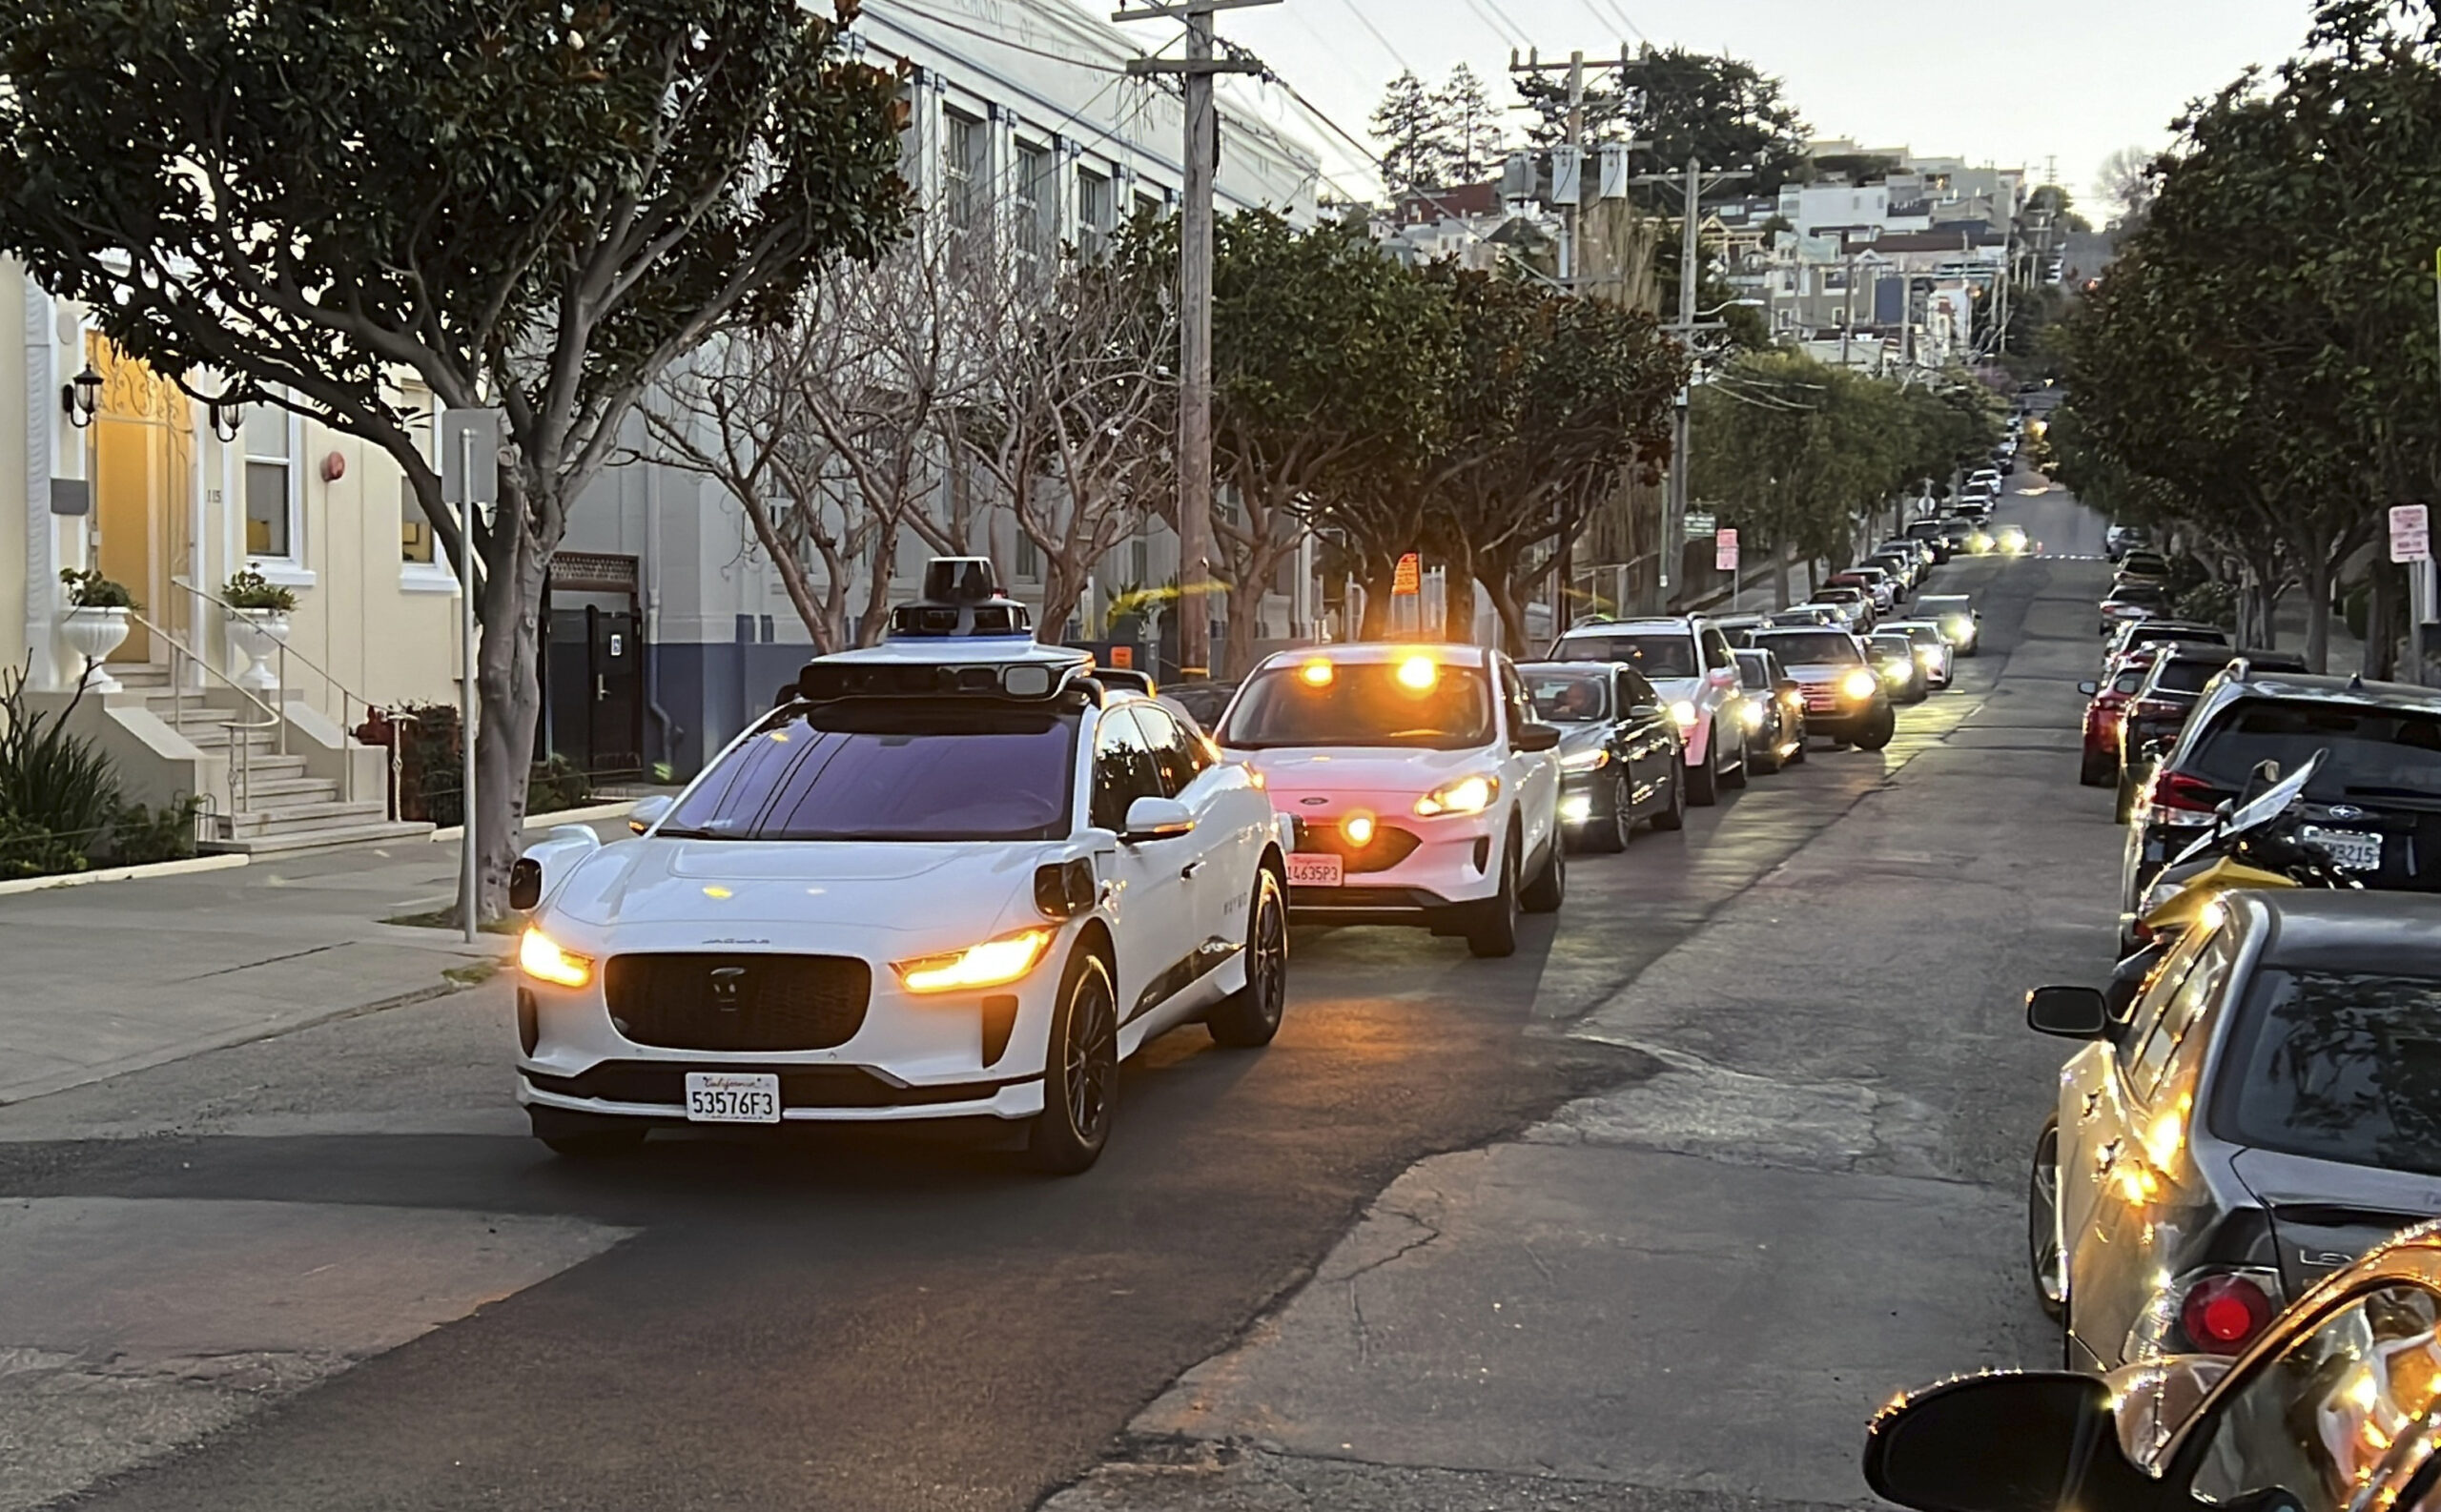 Cruise and Waymo’s San Francisco Robotaxi Operations Delayed by State Regulator